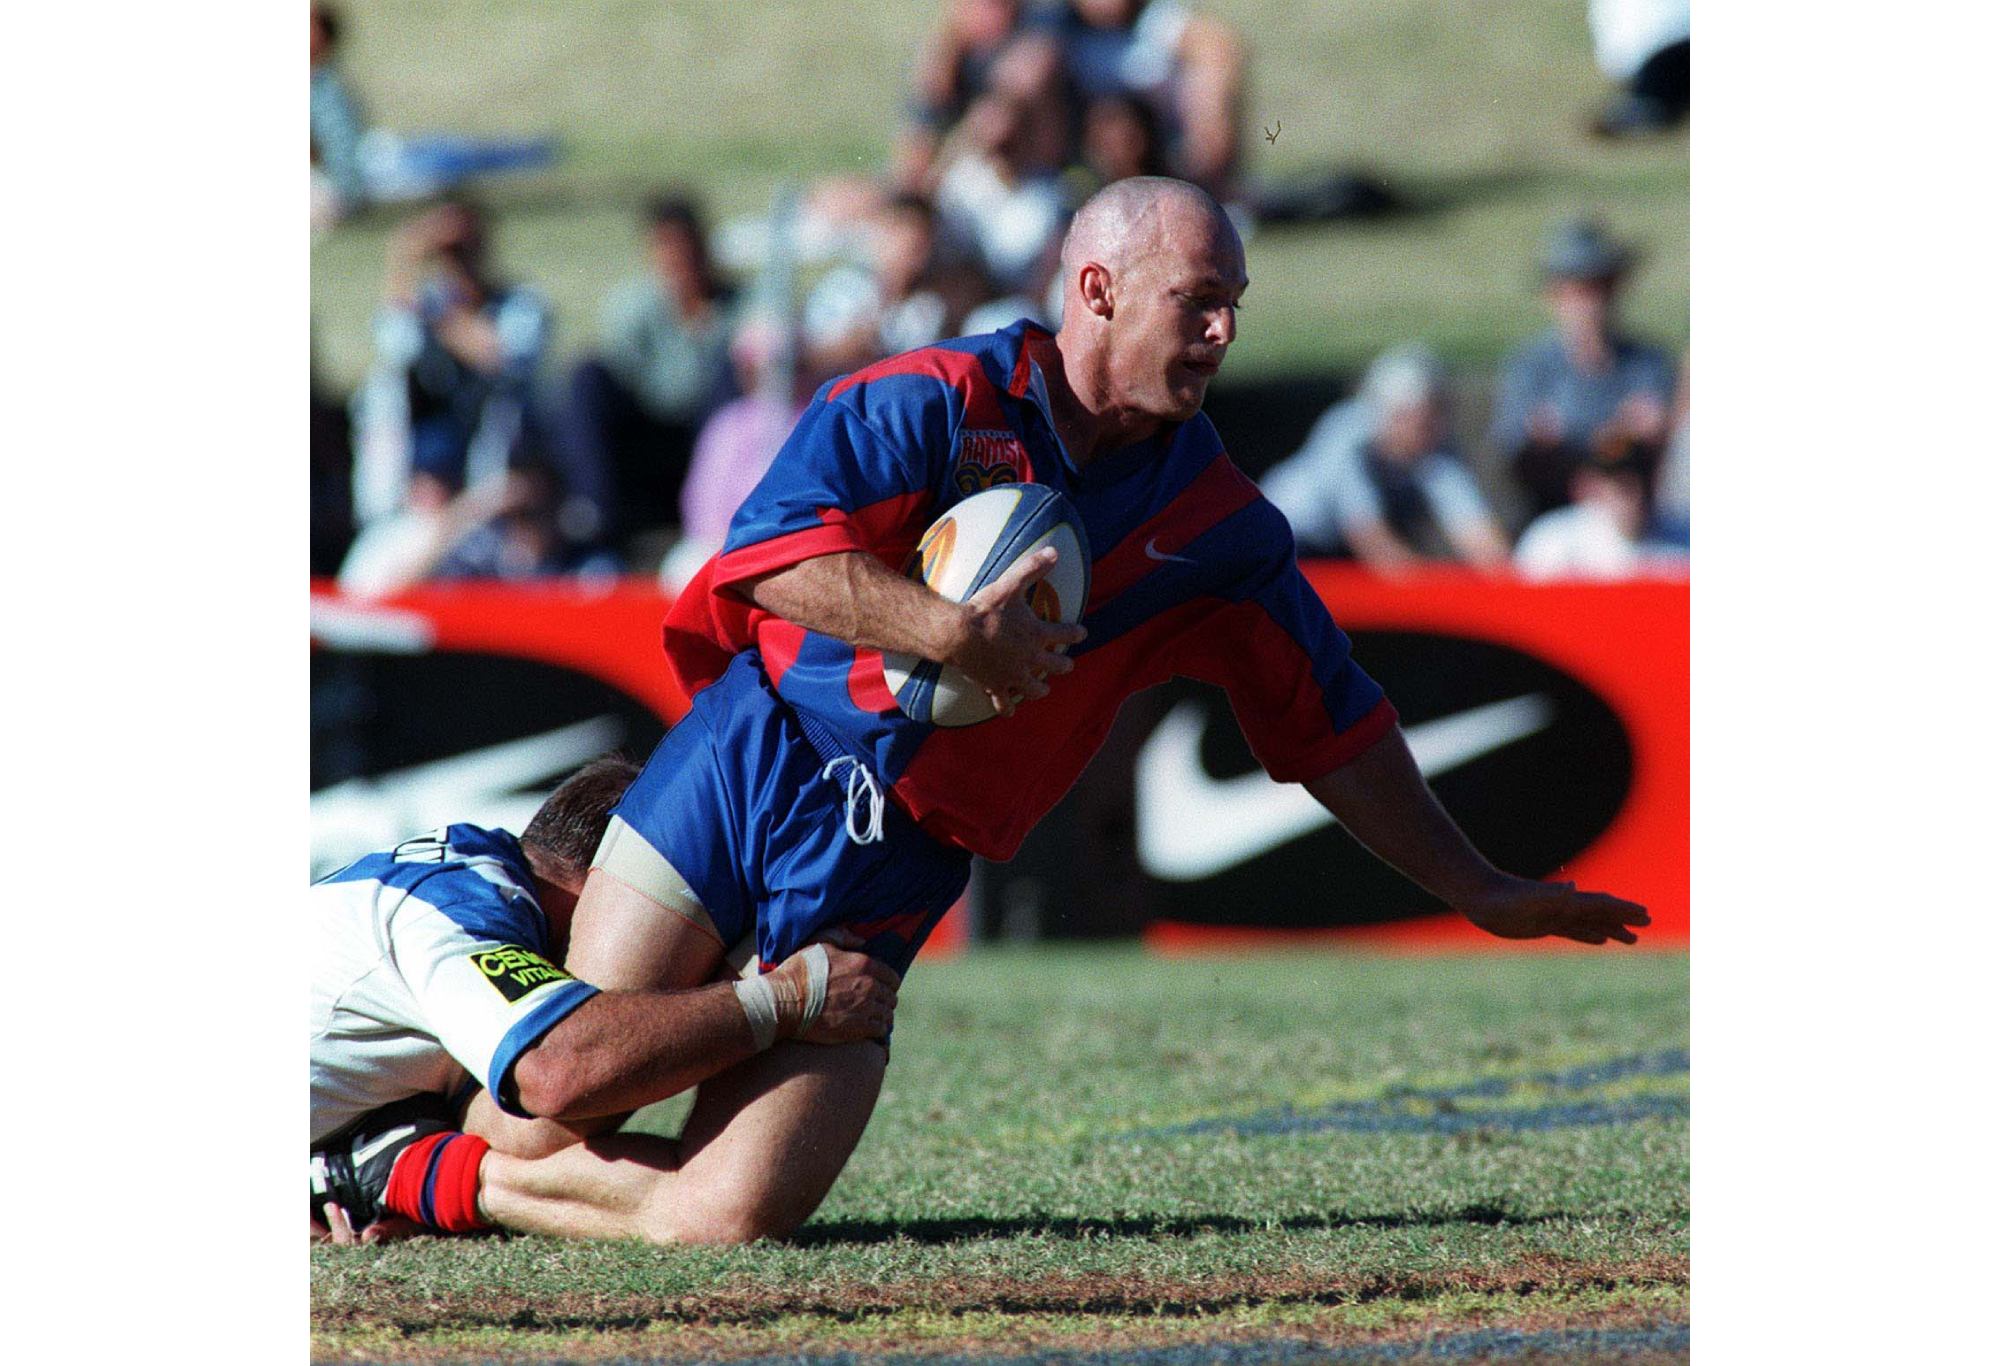 Former international Kerrod Walters is tackled while playing for the Adelaide Rams in 1997. (Photo: Getty Images)